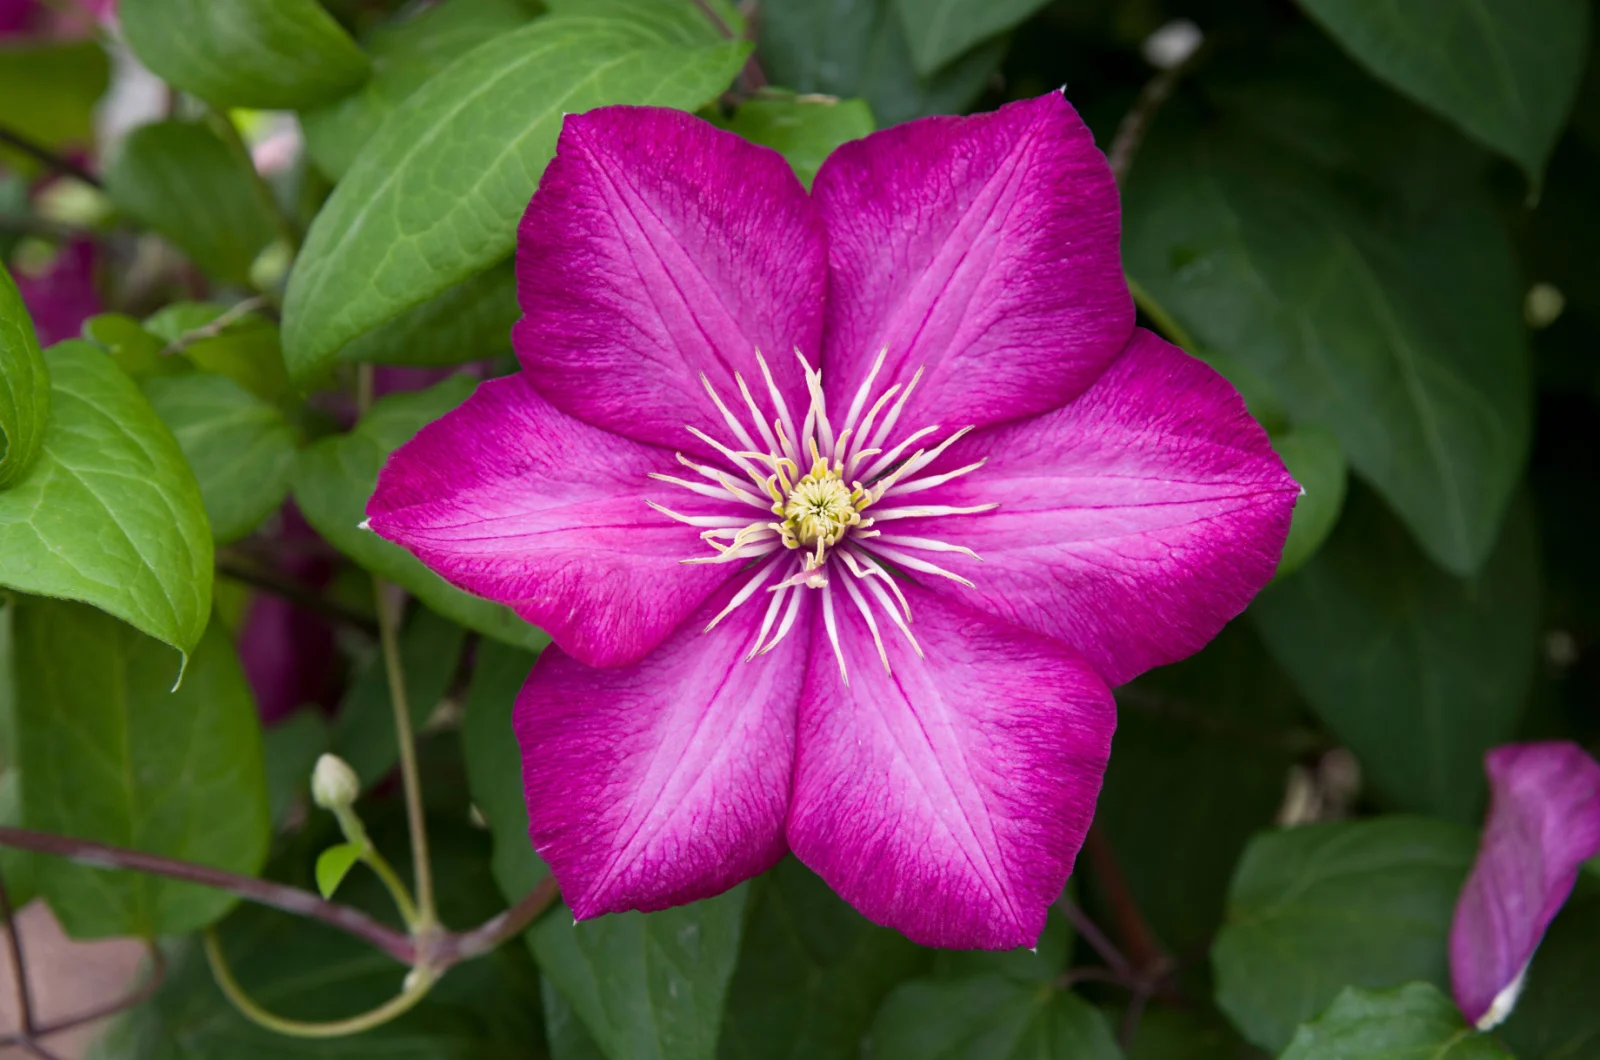 Flower of the pink clematis